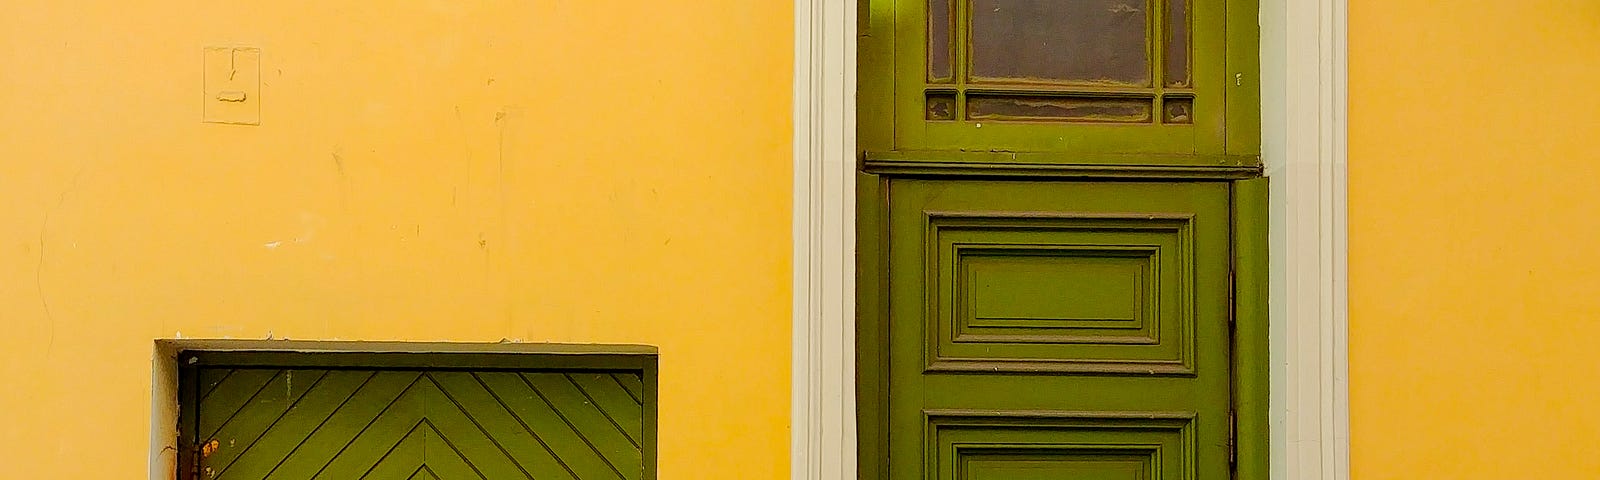 Small vs large green doors against a yellow wall